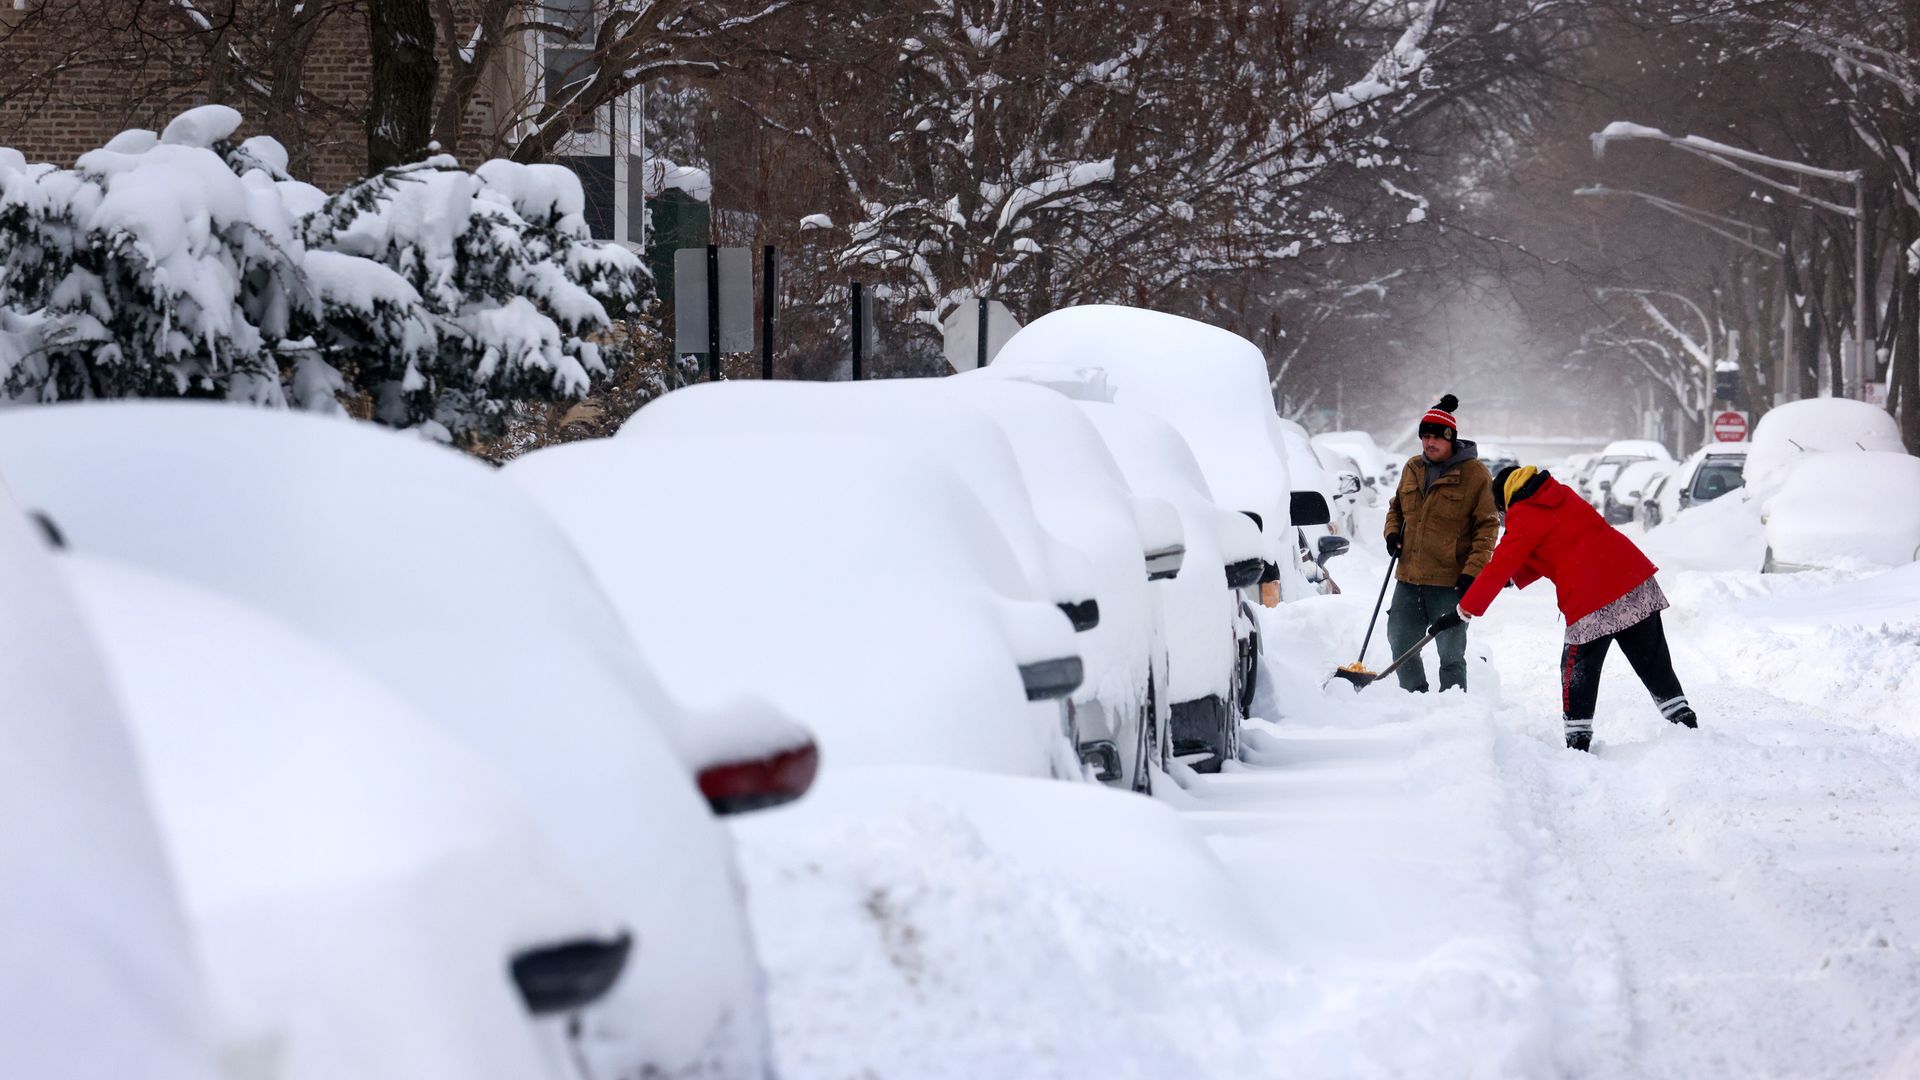 Photo of two people shoveling snow next to a line of cars